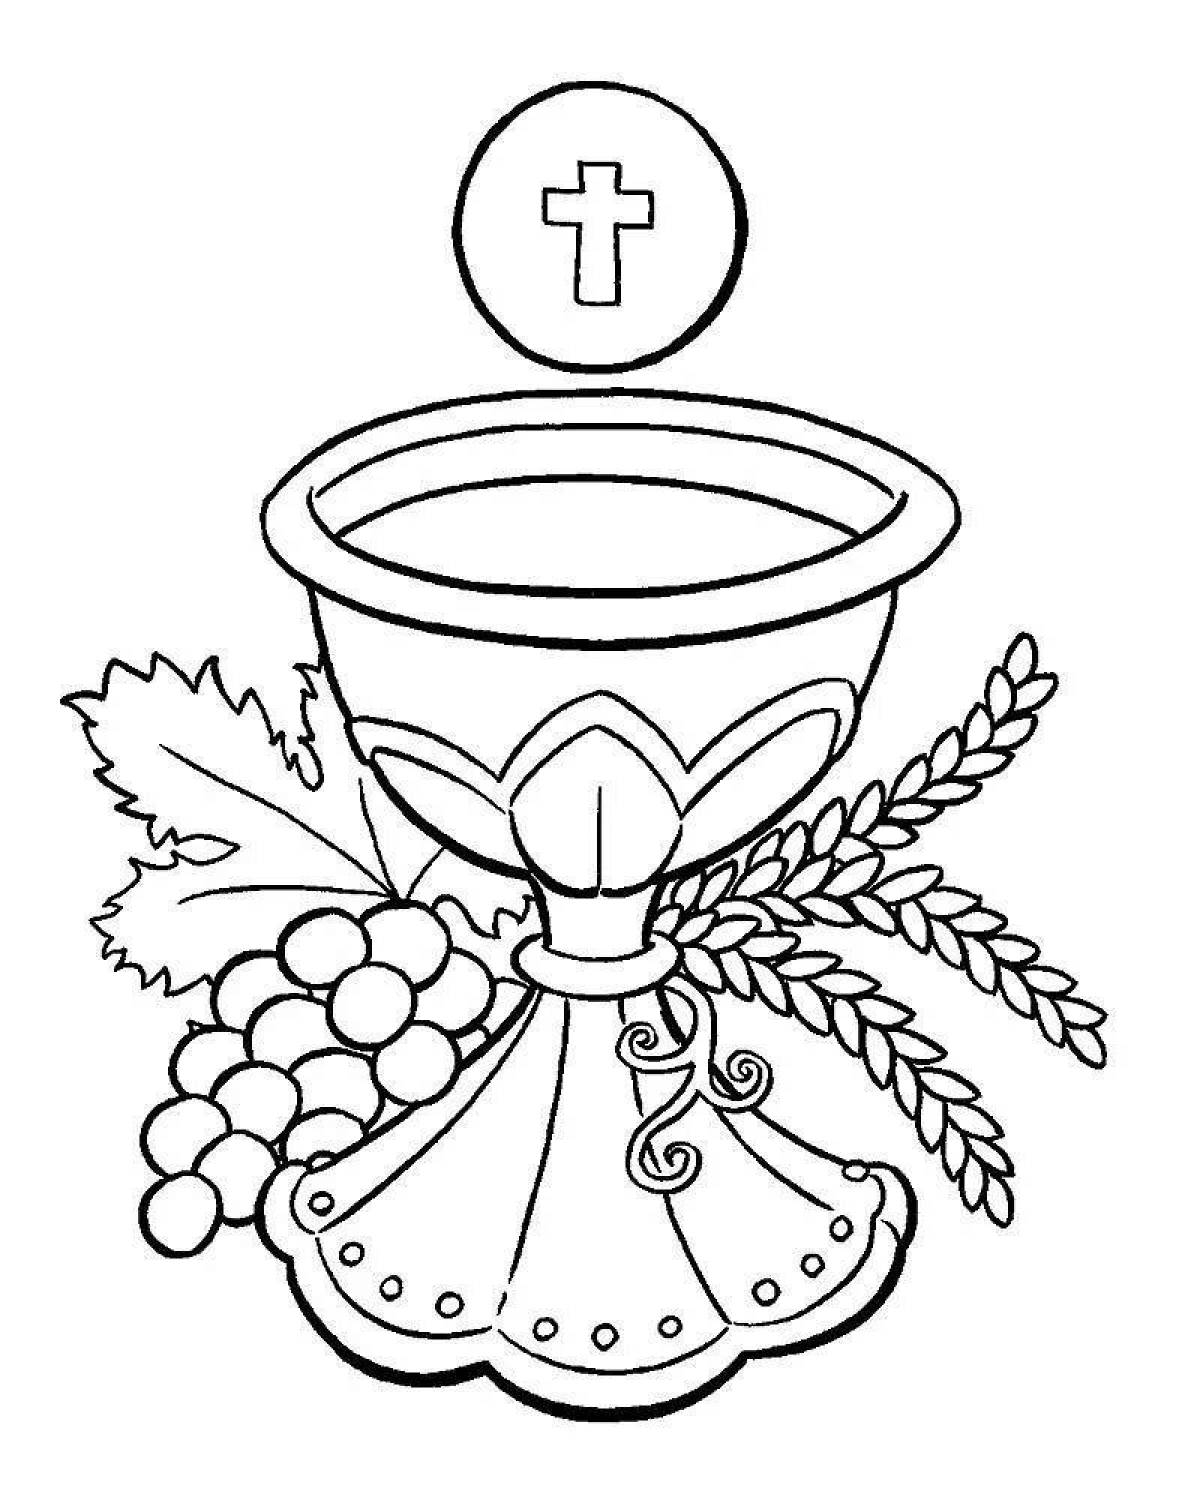 Radiant baptism coloring page